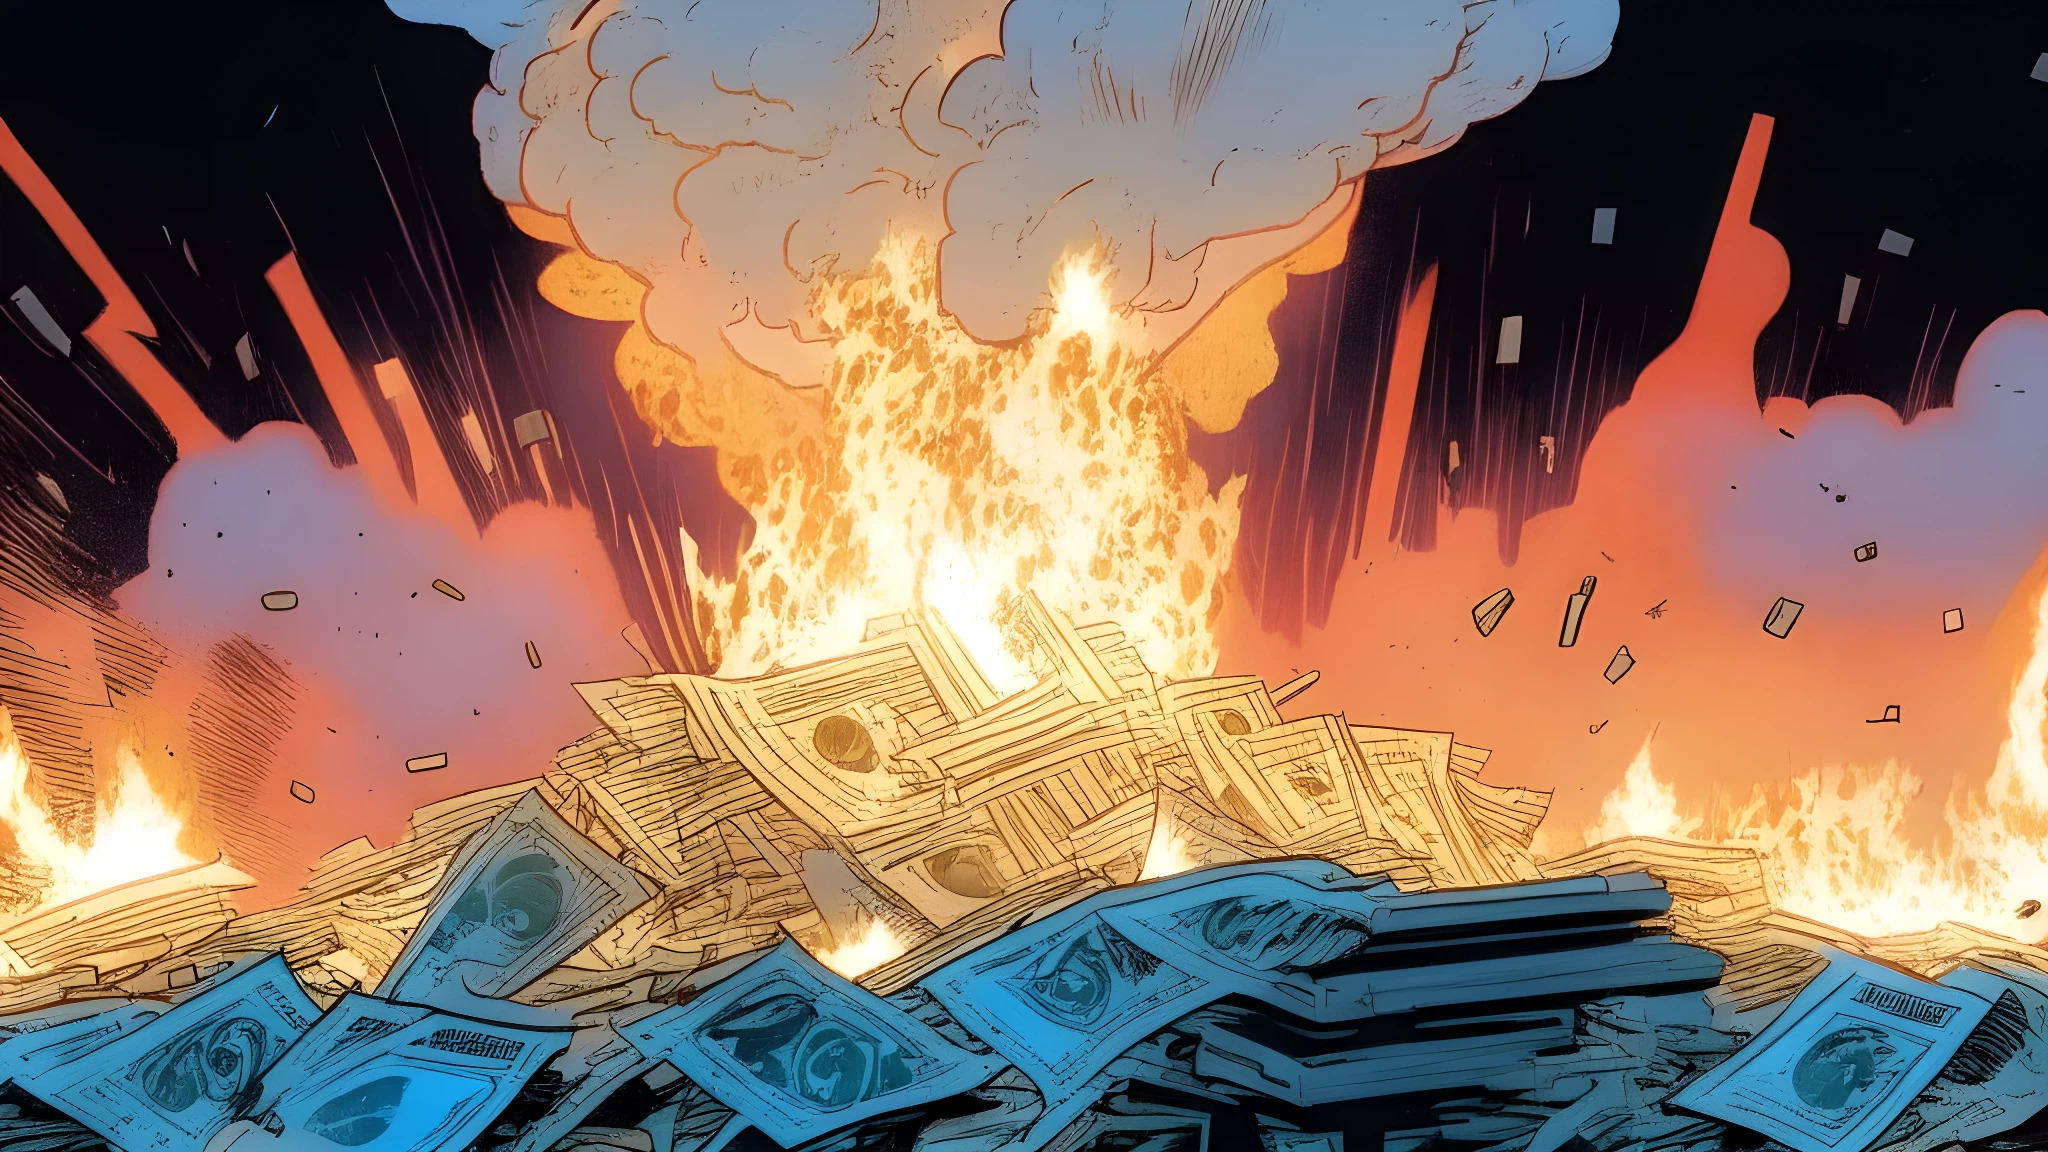 comic book drawing of a big pile of money burning, dramatic shadows, with explosions in the background